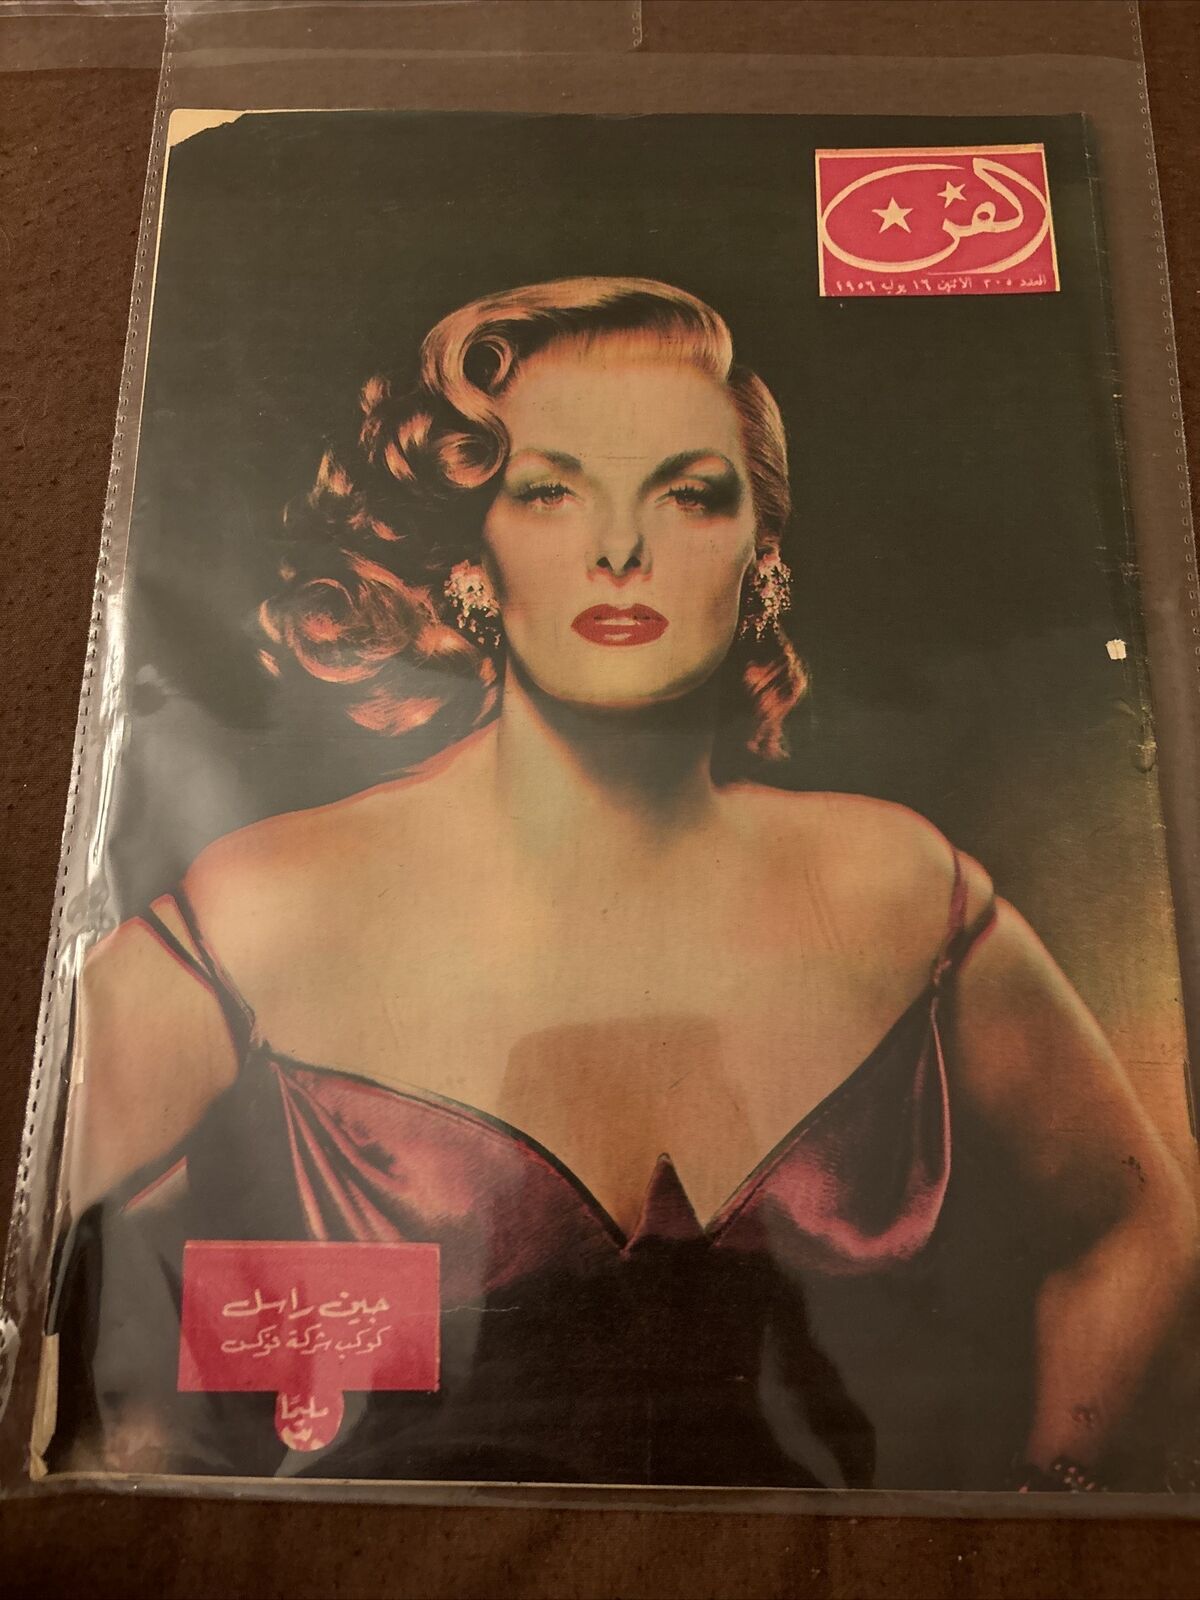 1956 Fan Magazine Actress Jane Russell Cover Arabic Scarce Cover